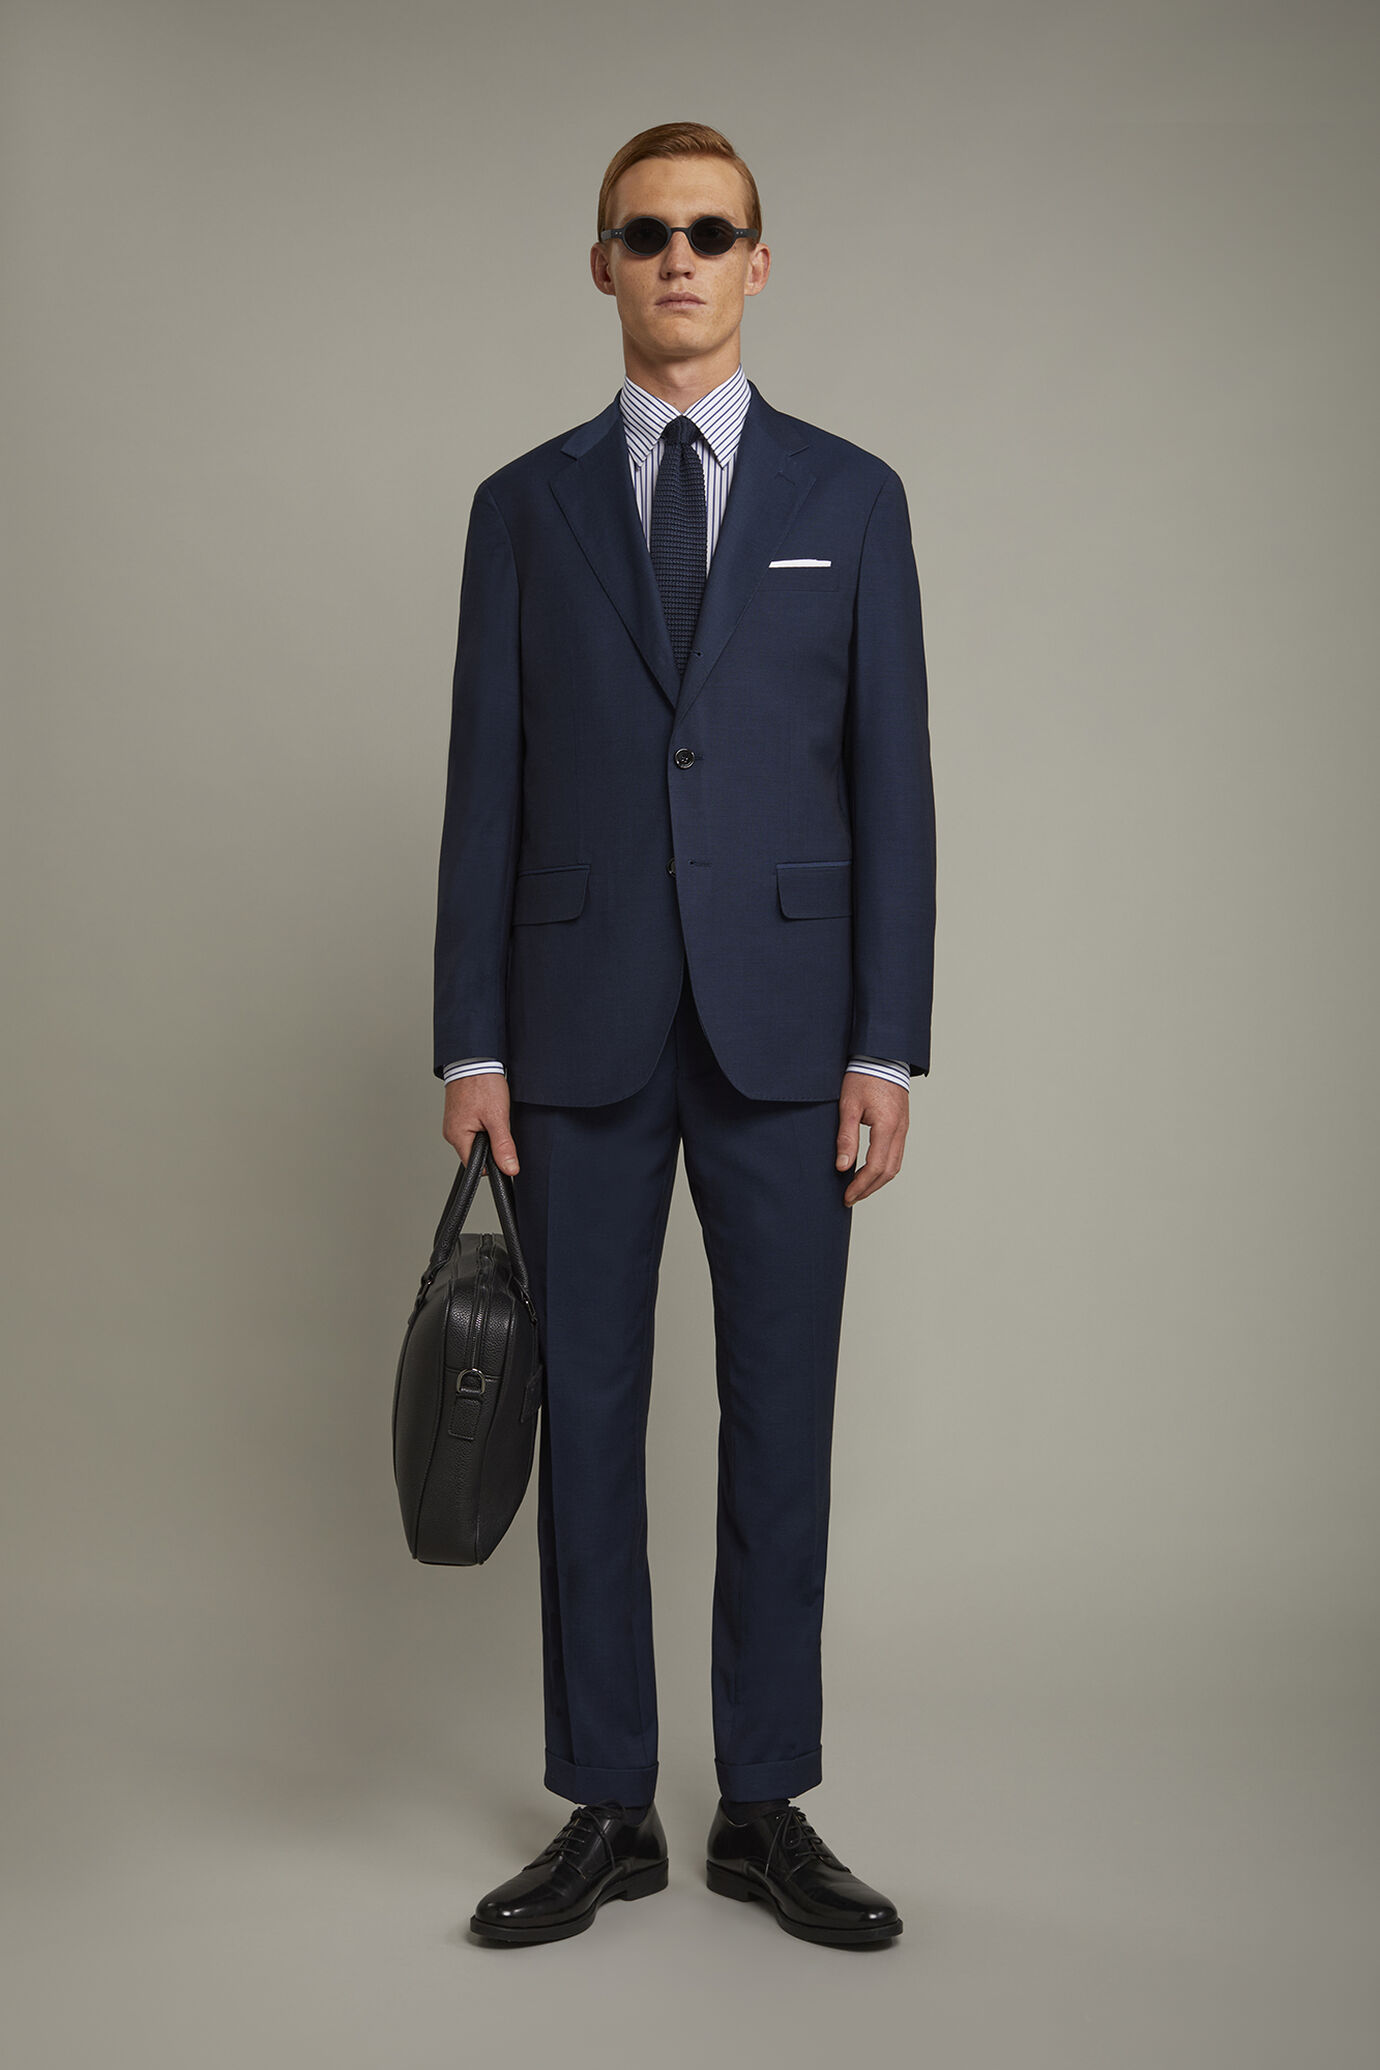 Men's single-breasted suit with regular fit partridge eye design